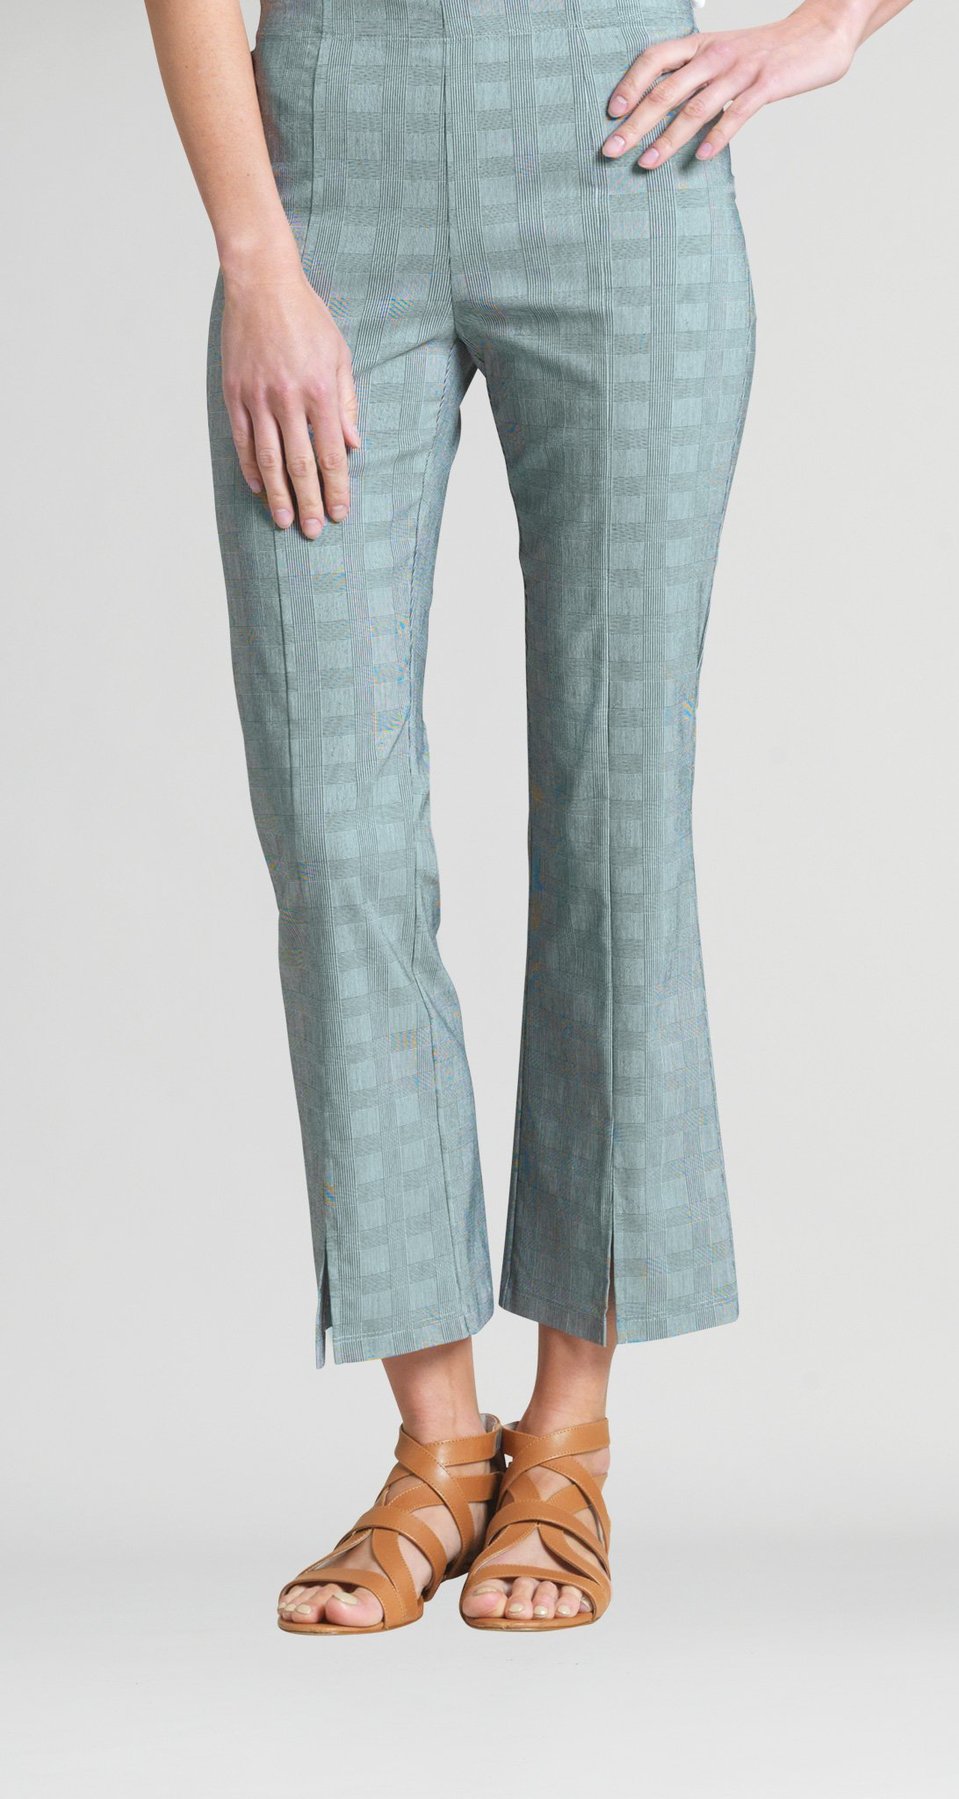 Clara Sunwoo Techno Stretch Ankle Pant, Glen Plaid - Now 60% off! –  Something Different Shopping